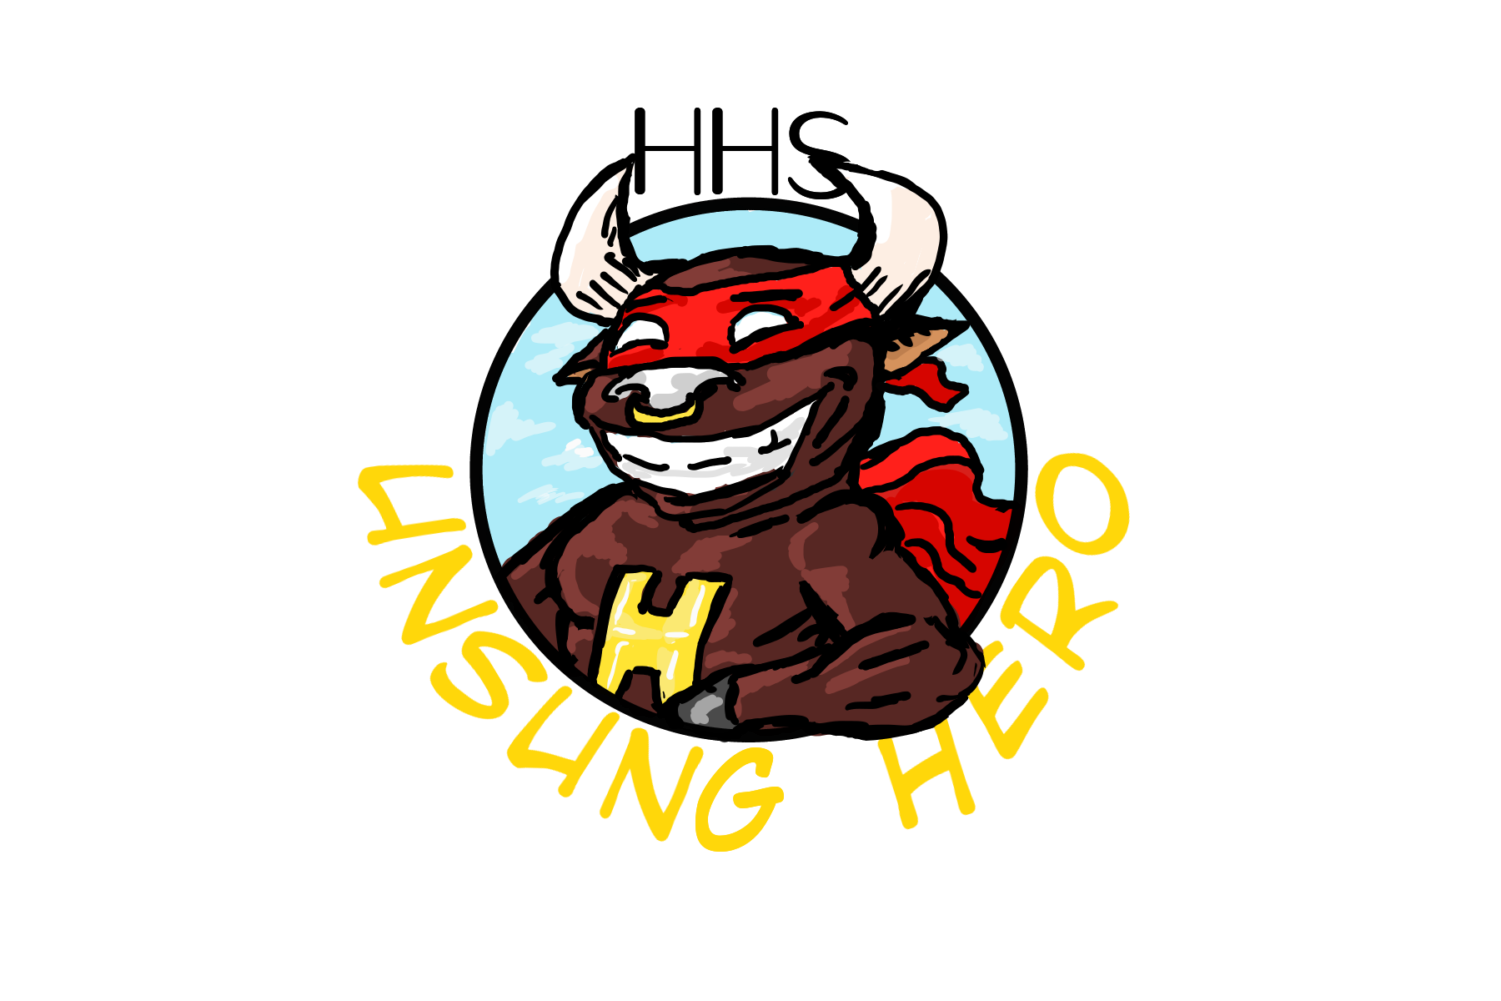 Hereford Harbinger is excited to announce the Unsung Hero. Make sure to cast your vote on the Google form found at @hharbinger on Instagram in the bio, or on your class Schoology page or the box in Ms. Stachuras room, 120.